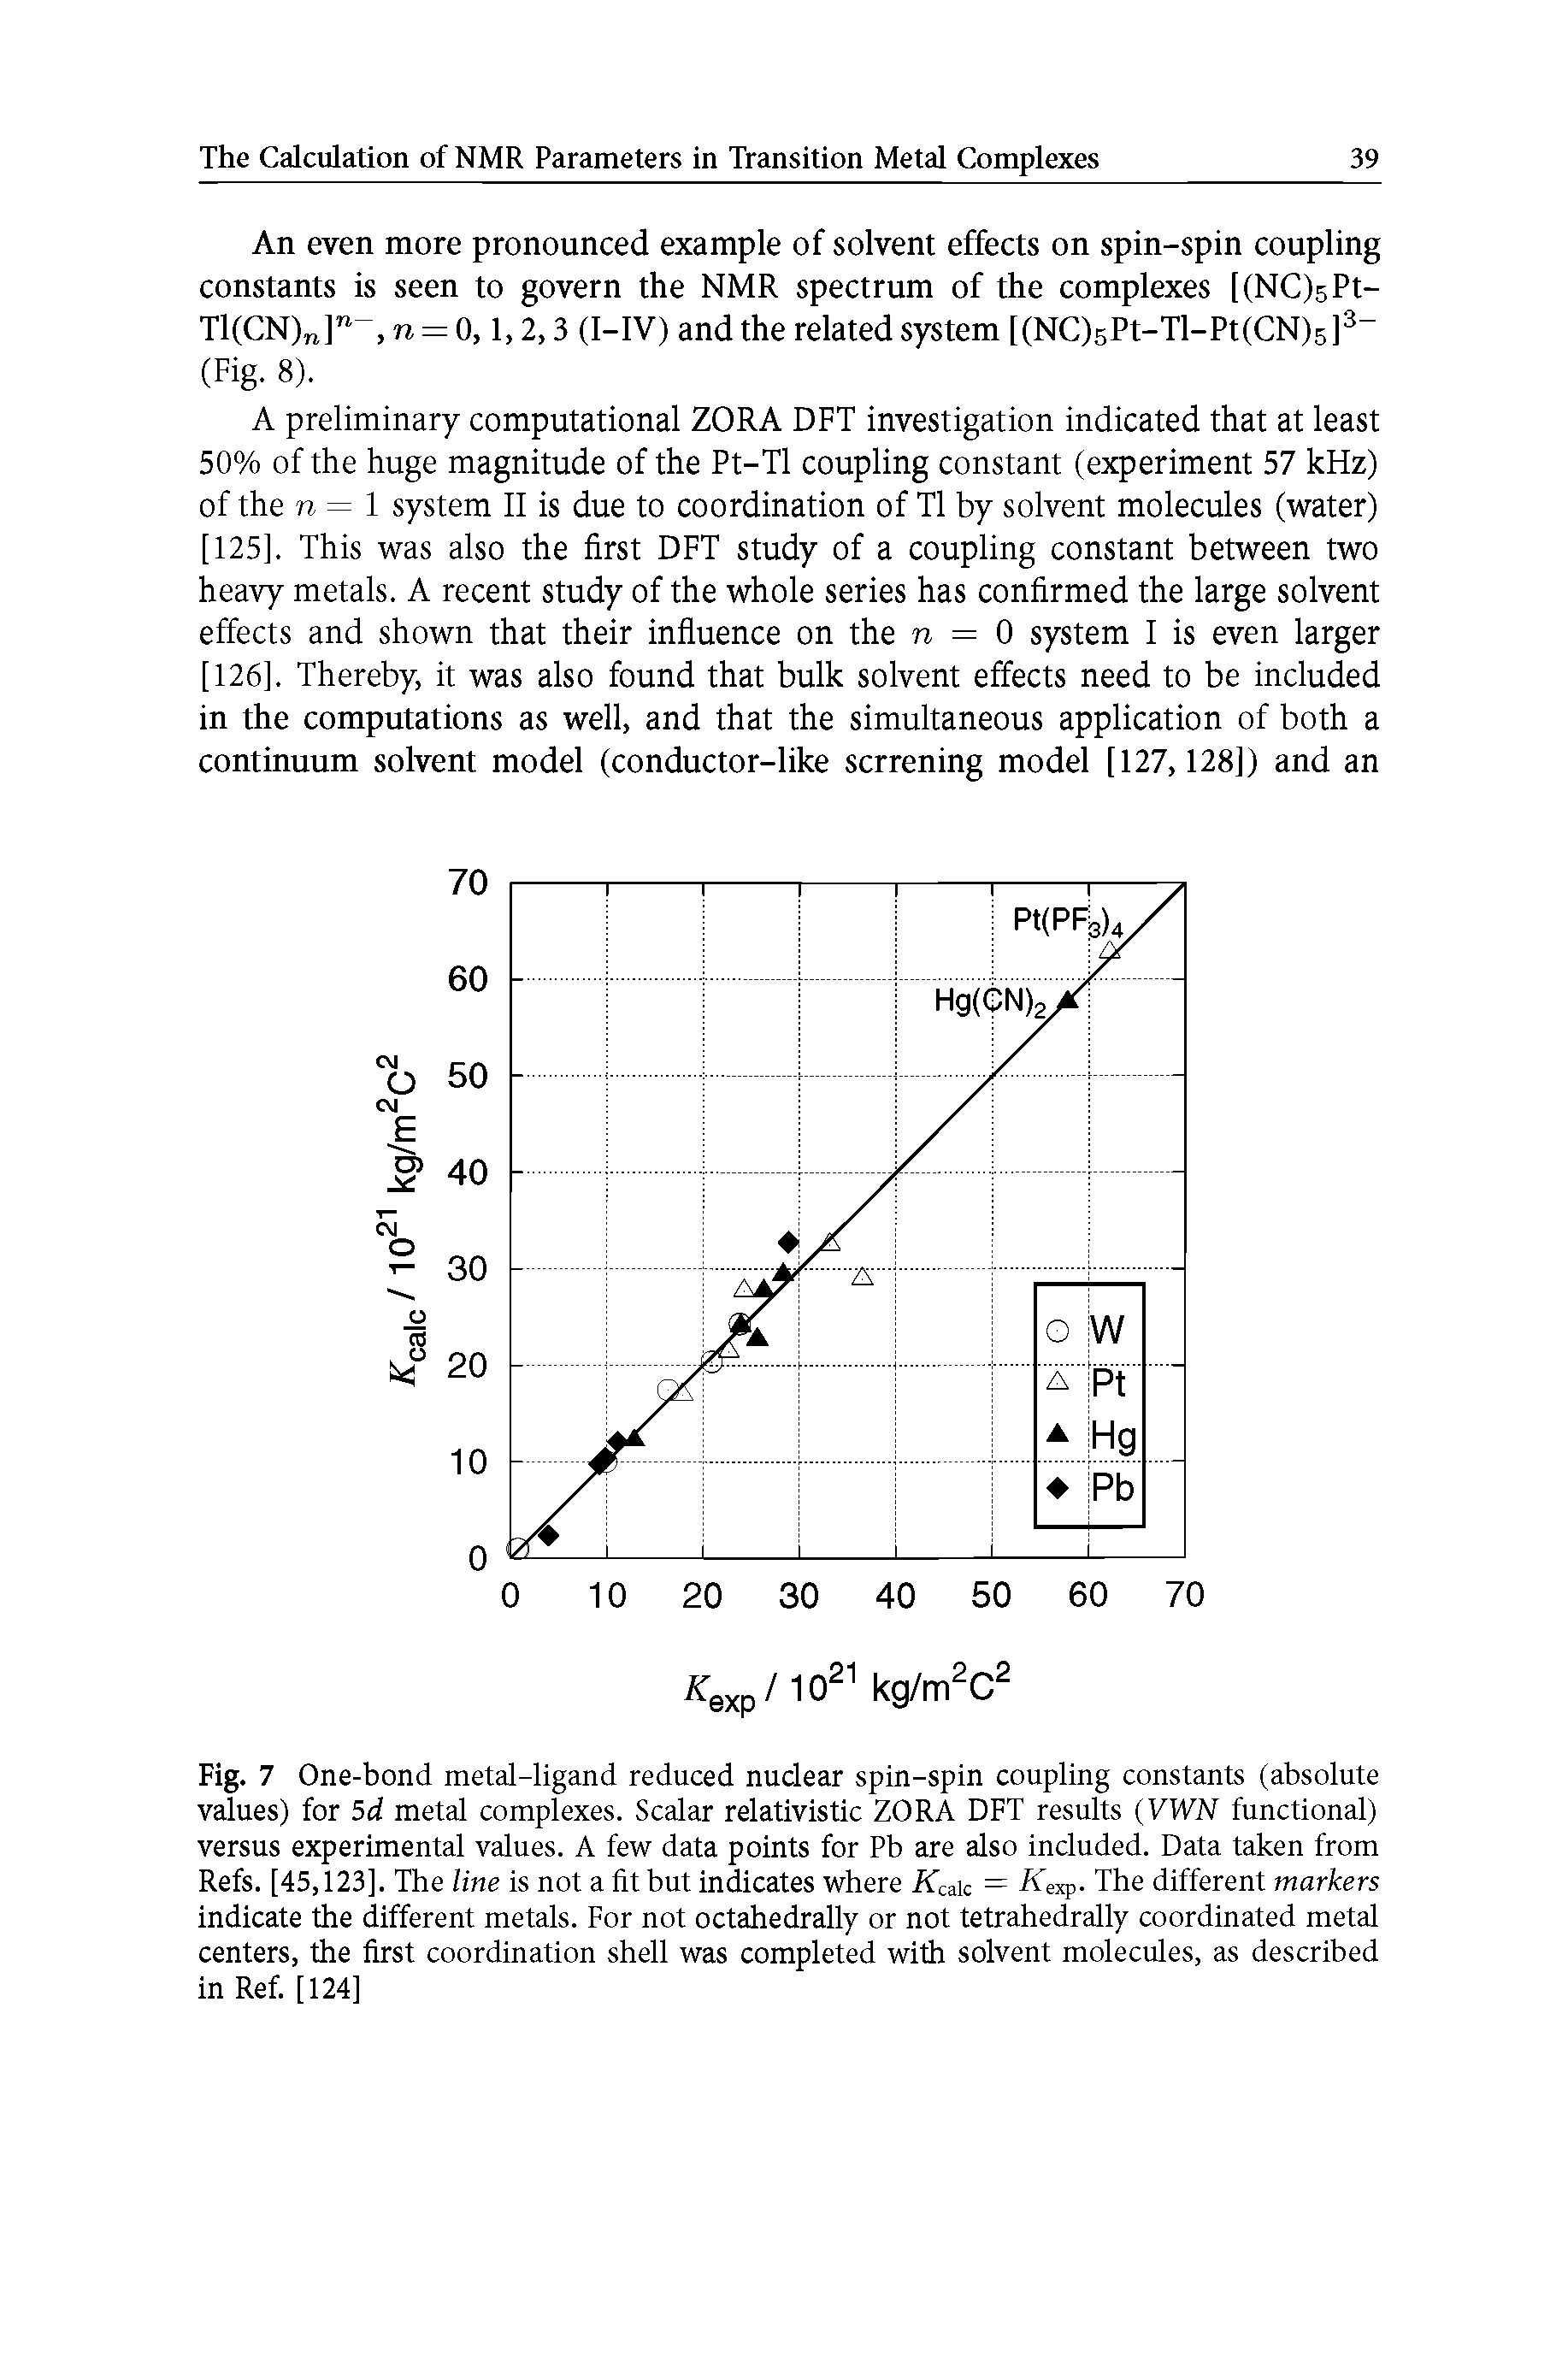 Fig. 7 One-bond metal-ligand reduced nudear spin-spin coupling constants (absolute values) for 5d metal complexes. Scalar relativistic ZORA DFT results (VWN functional) versus experimental values. A few data points for Pb are also included. Data taken from Refs. [45,123]. The line is not a fit but indicates where Ka c = Kexp. The different markers indicate the different metals. For not octahedrally or not tetrahedrally coordinated metal centers, the first coordination shell was completed with solvent molecules, as described in Ref. [124]...